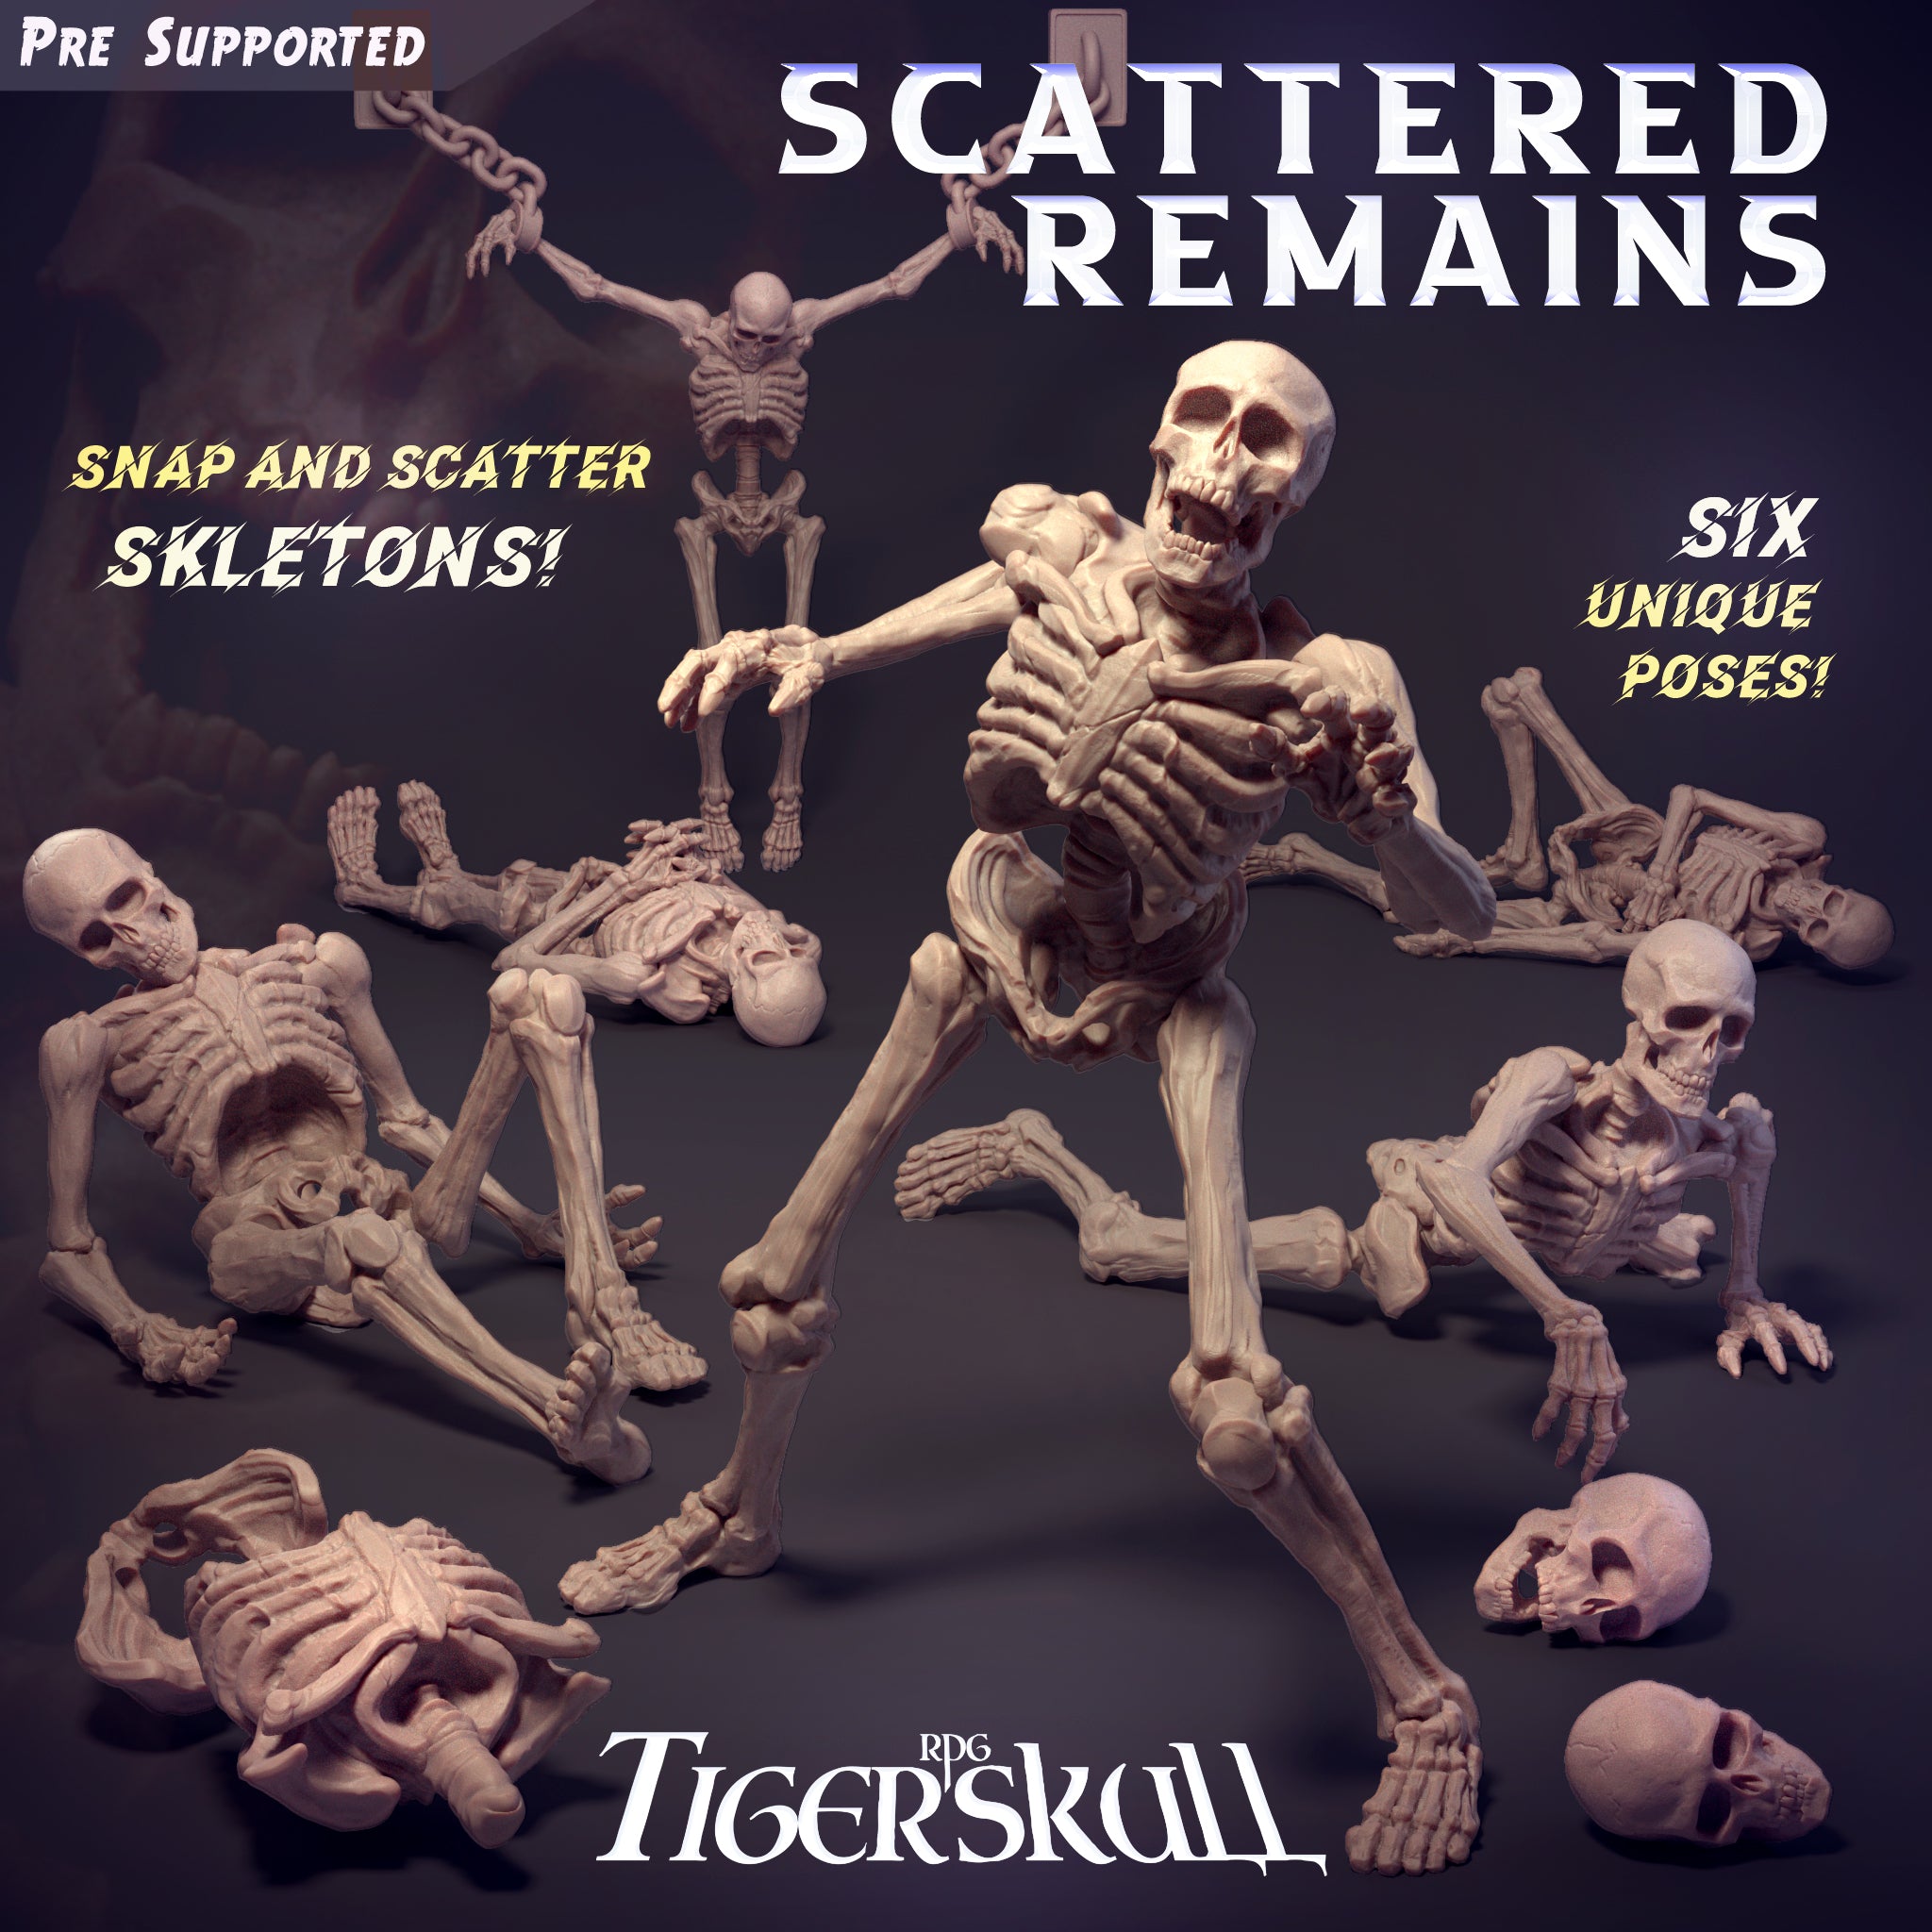 The Scattered Remains STL collection